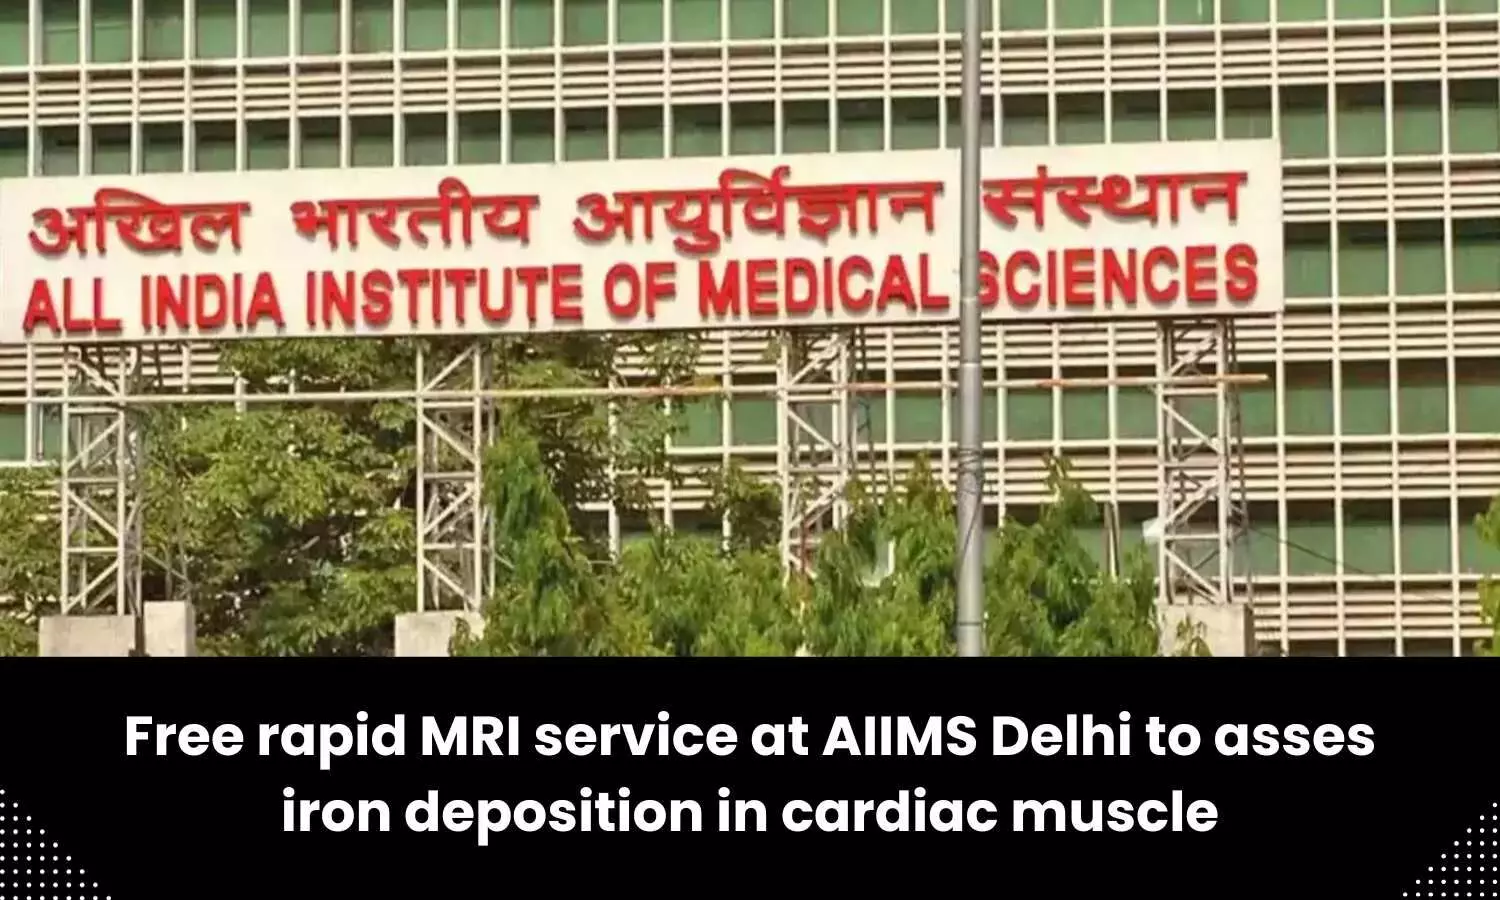 AIIMS Delhi begins free rapid cardiac MRI service to assess iron deposition in cardiac muscle of Thalassemia patients